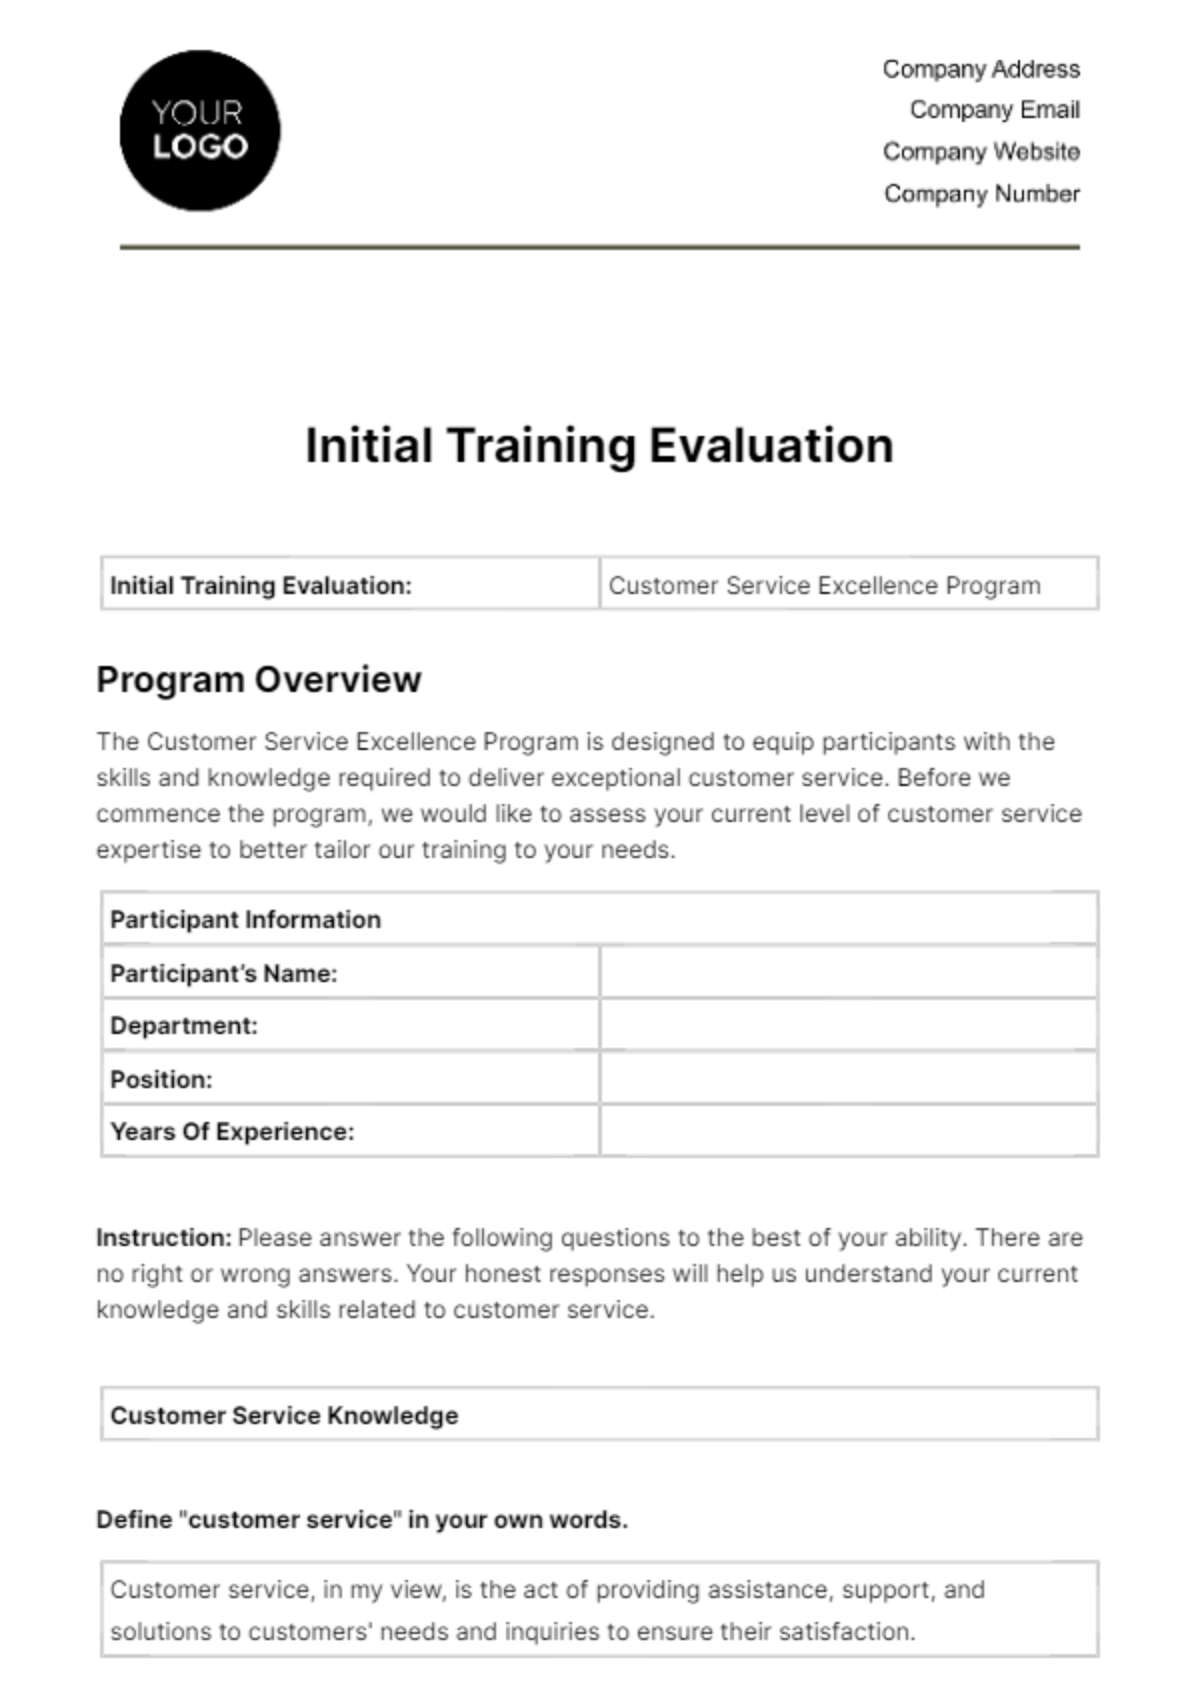 Initial Training Evaluation HR Template